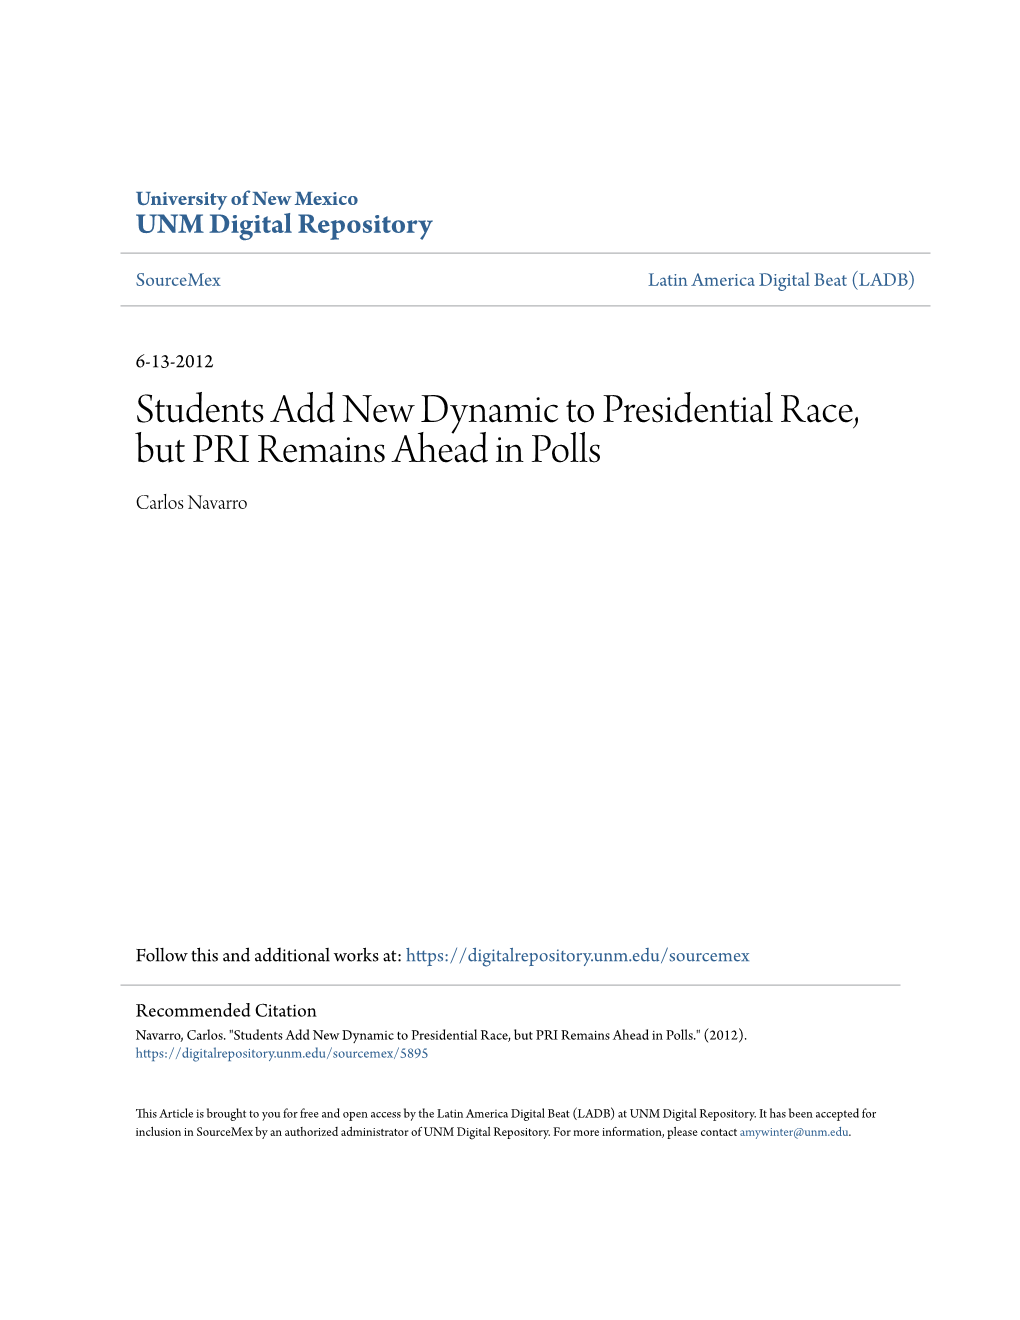 Students Add New Dynamic to Presidential Race, but PRI Remains Ahead in Polls Carlos Navarro